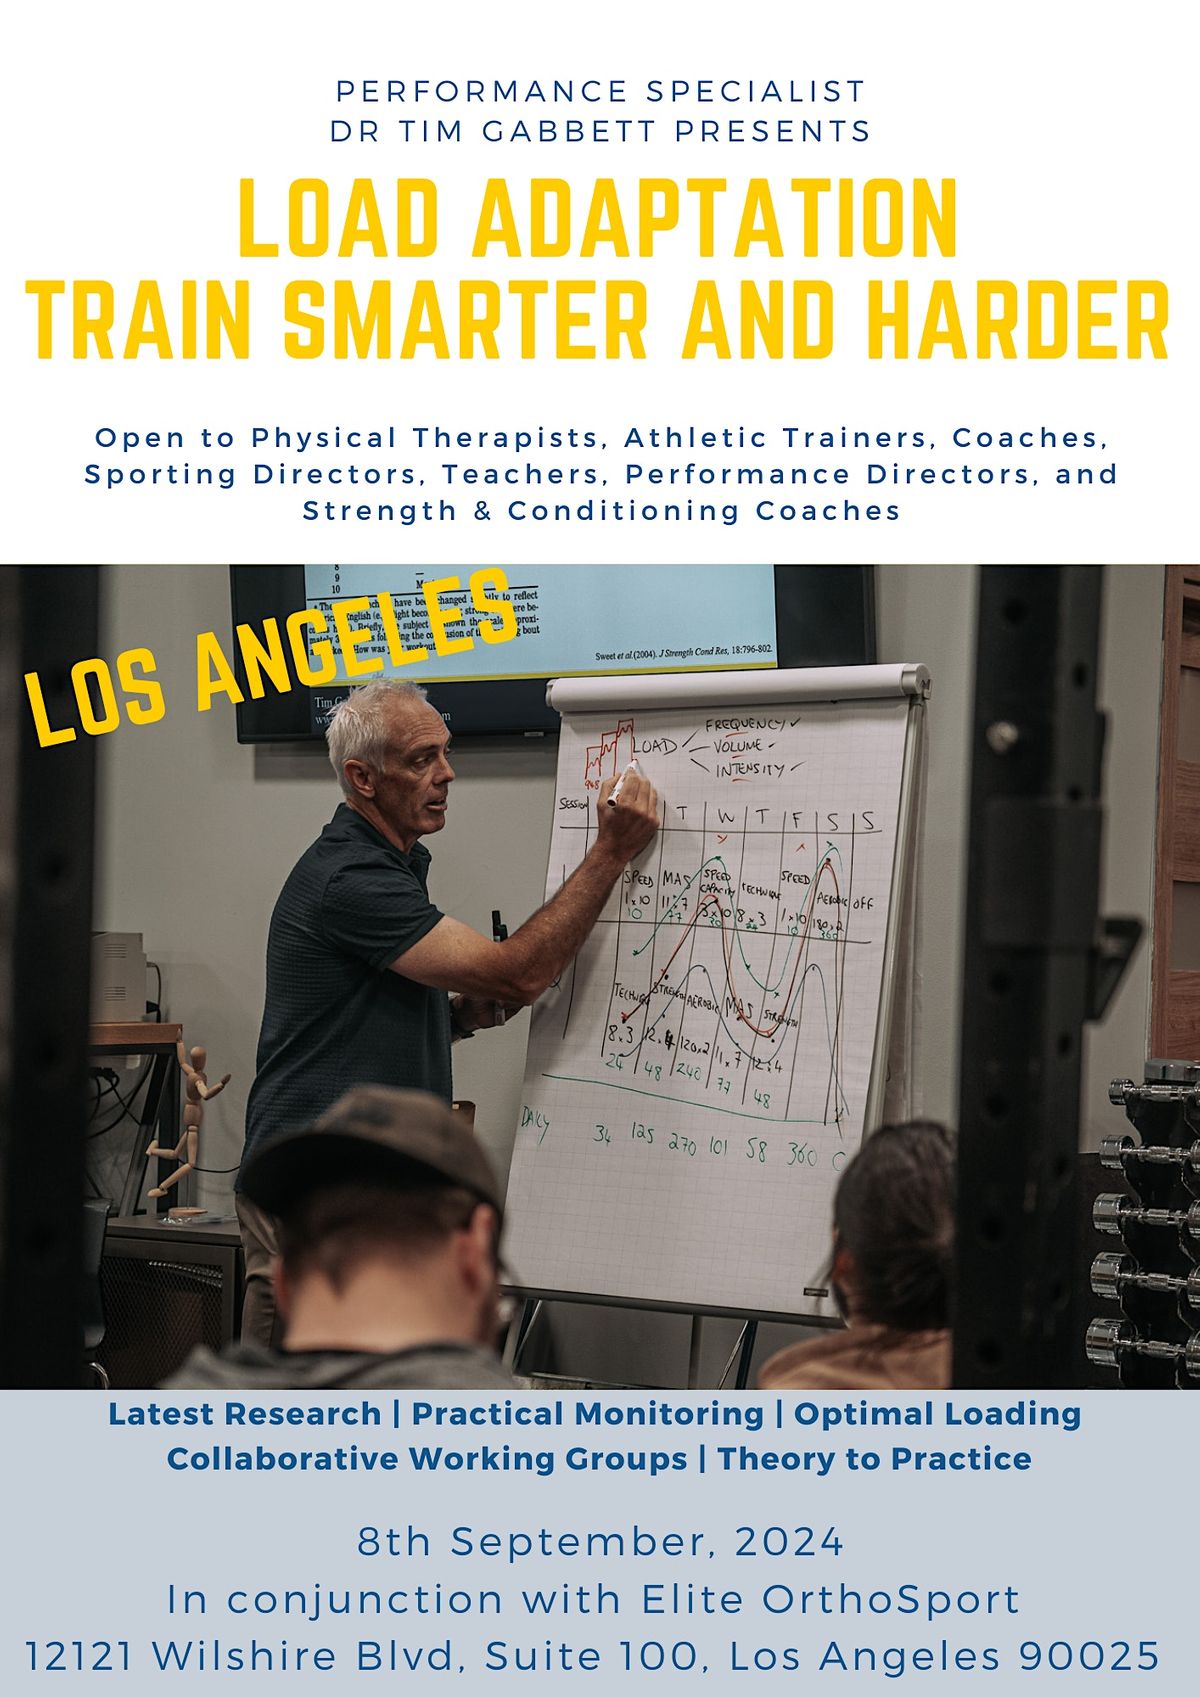 Load Adaptation - Train Smarter AND Harder (Los Angeles)